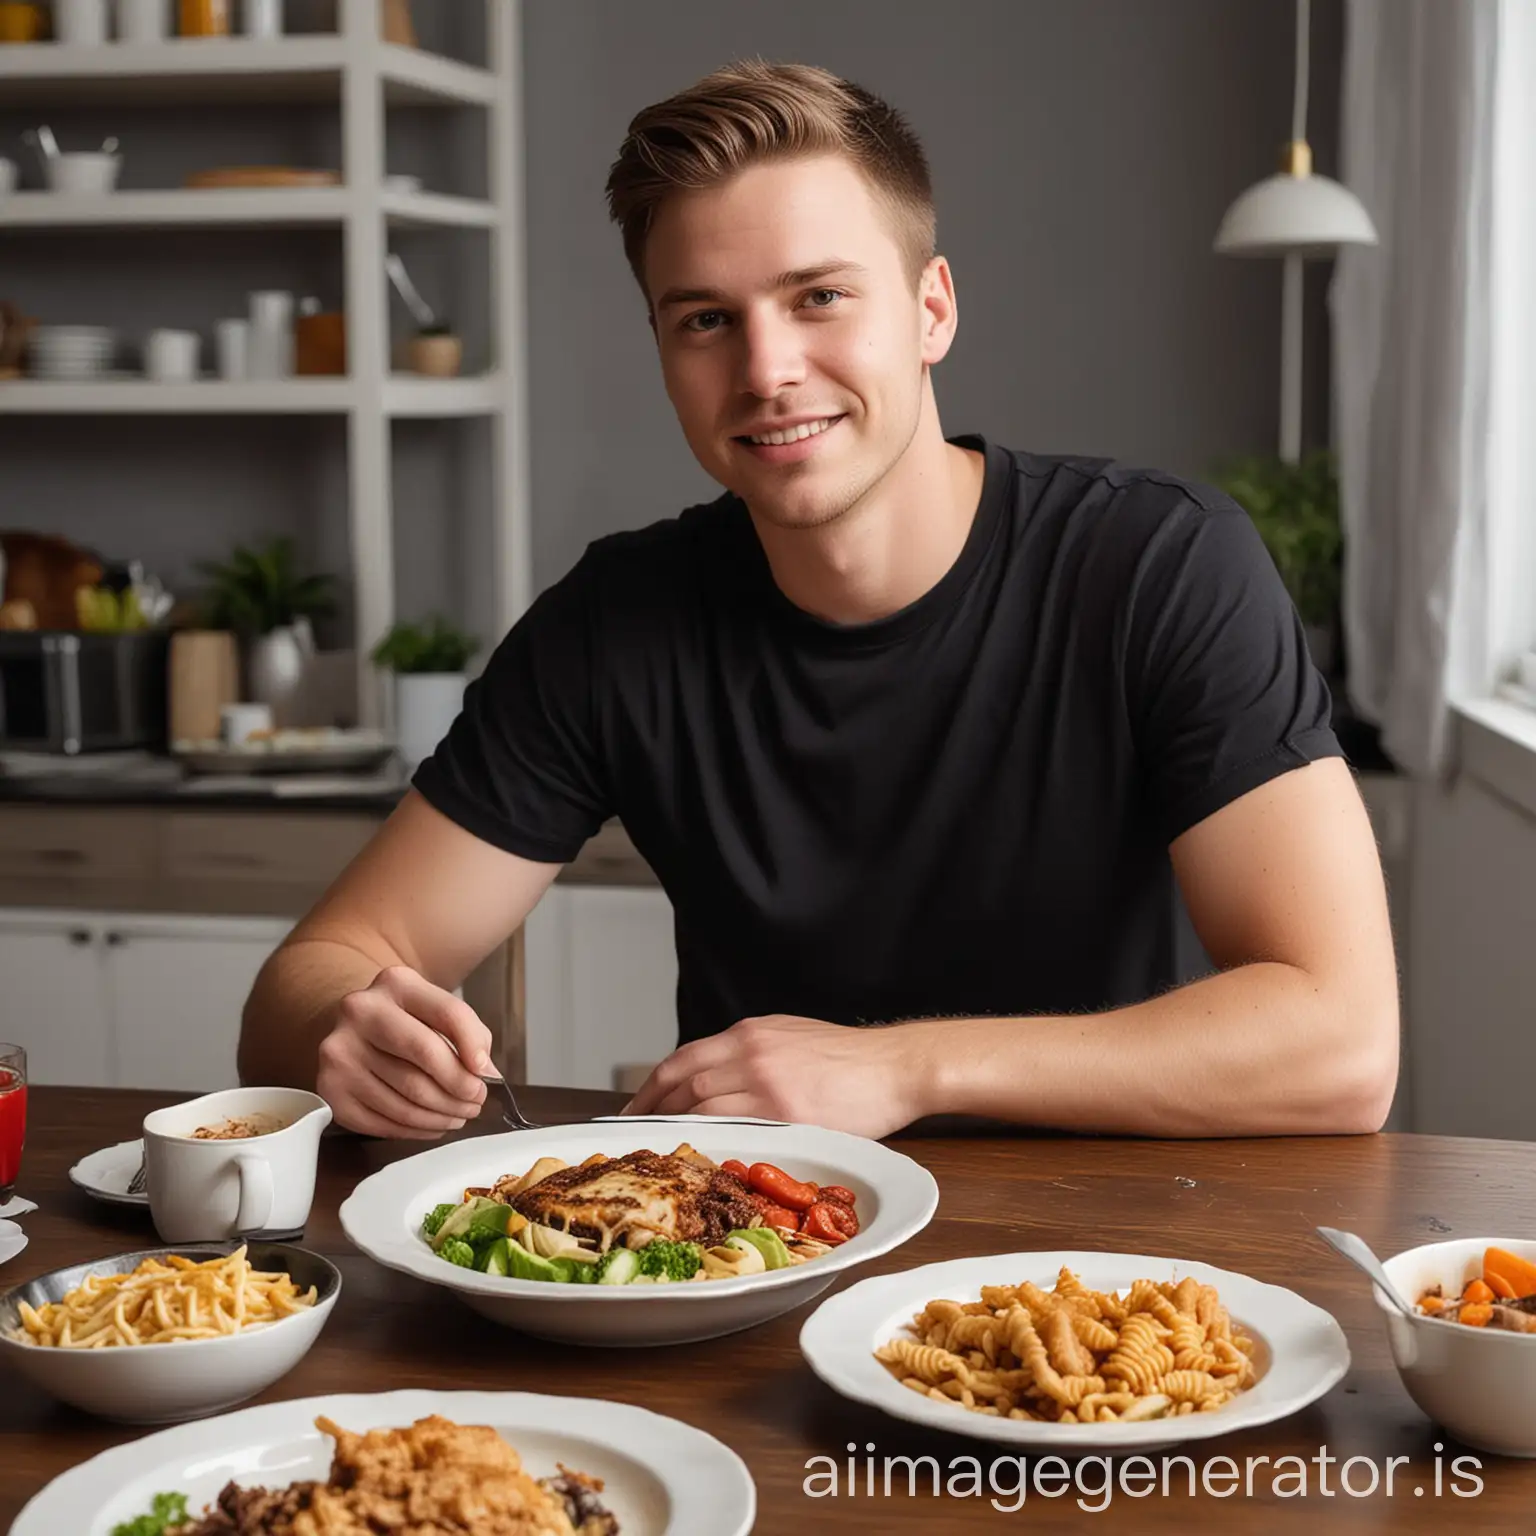 Young-American-Man-Eating-Dinner-at-Home-with-Traditional-American-Food